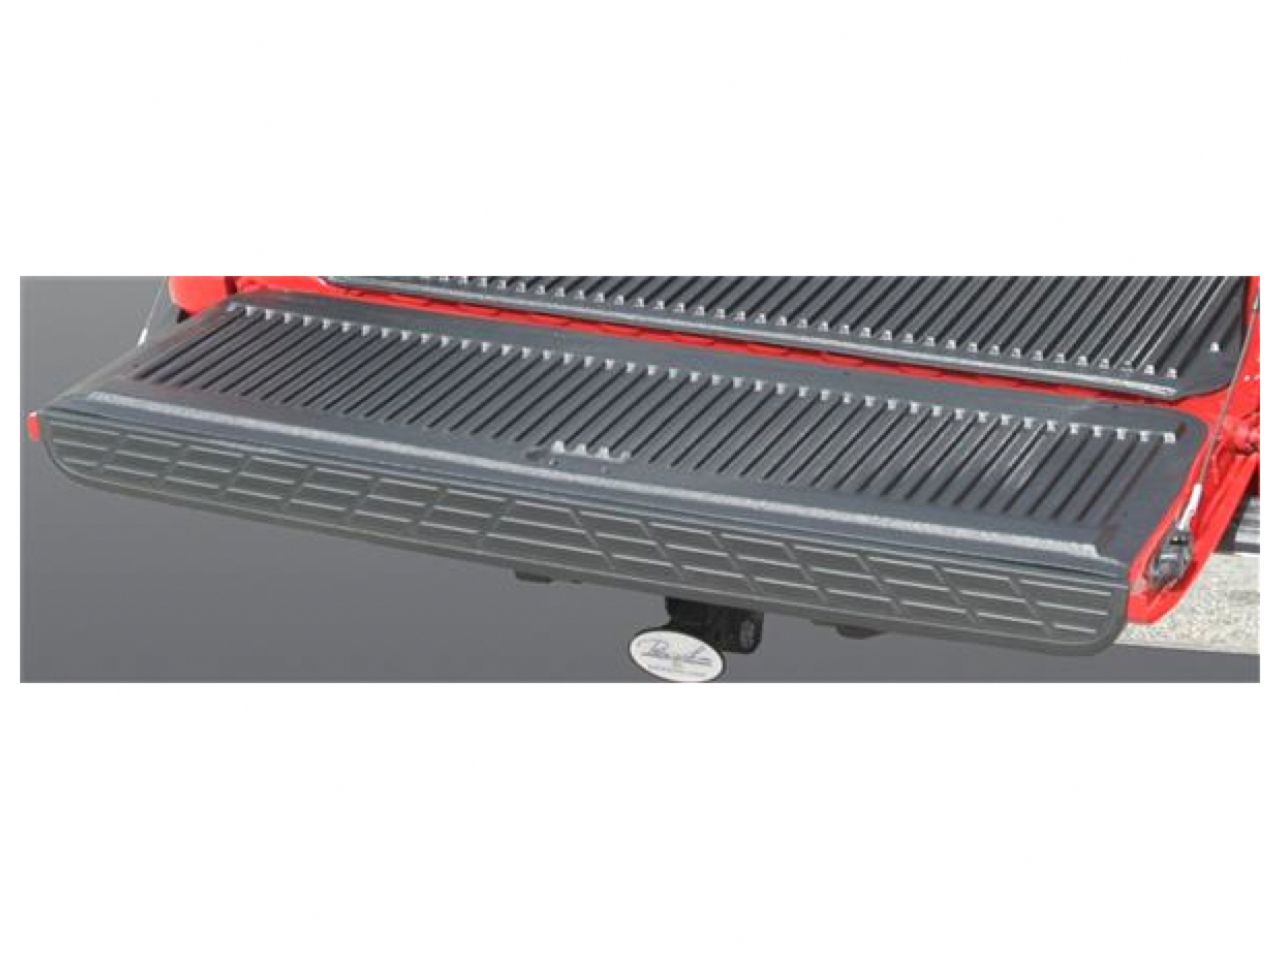 Rugged Liner Truck Bed Accessories NN09TG Item Image